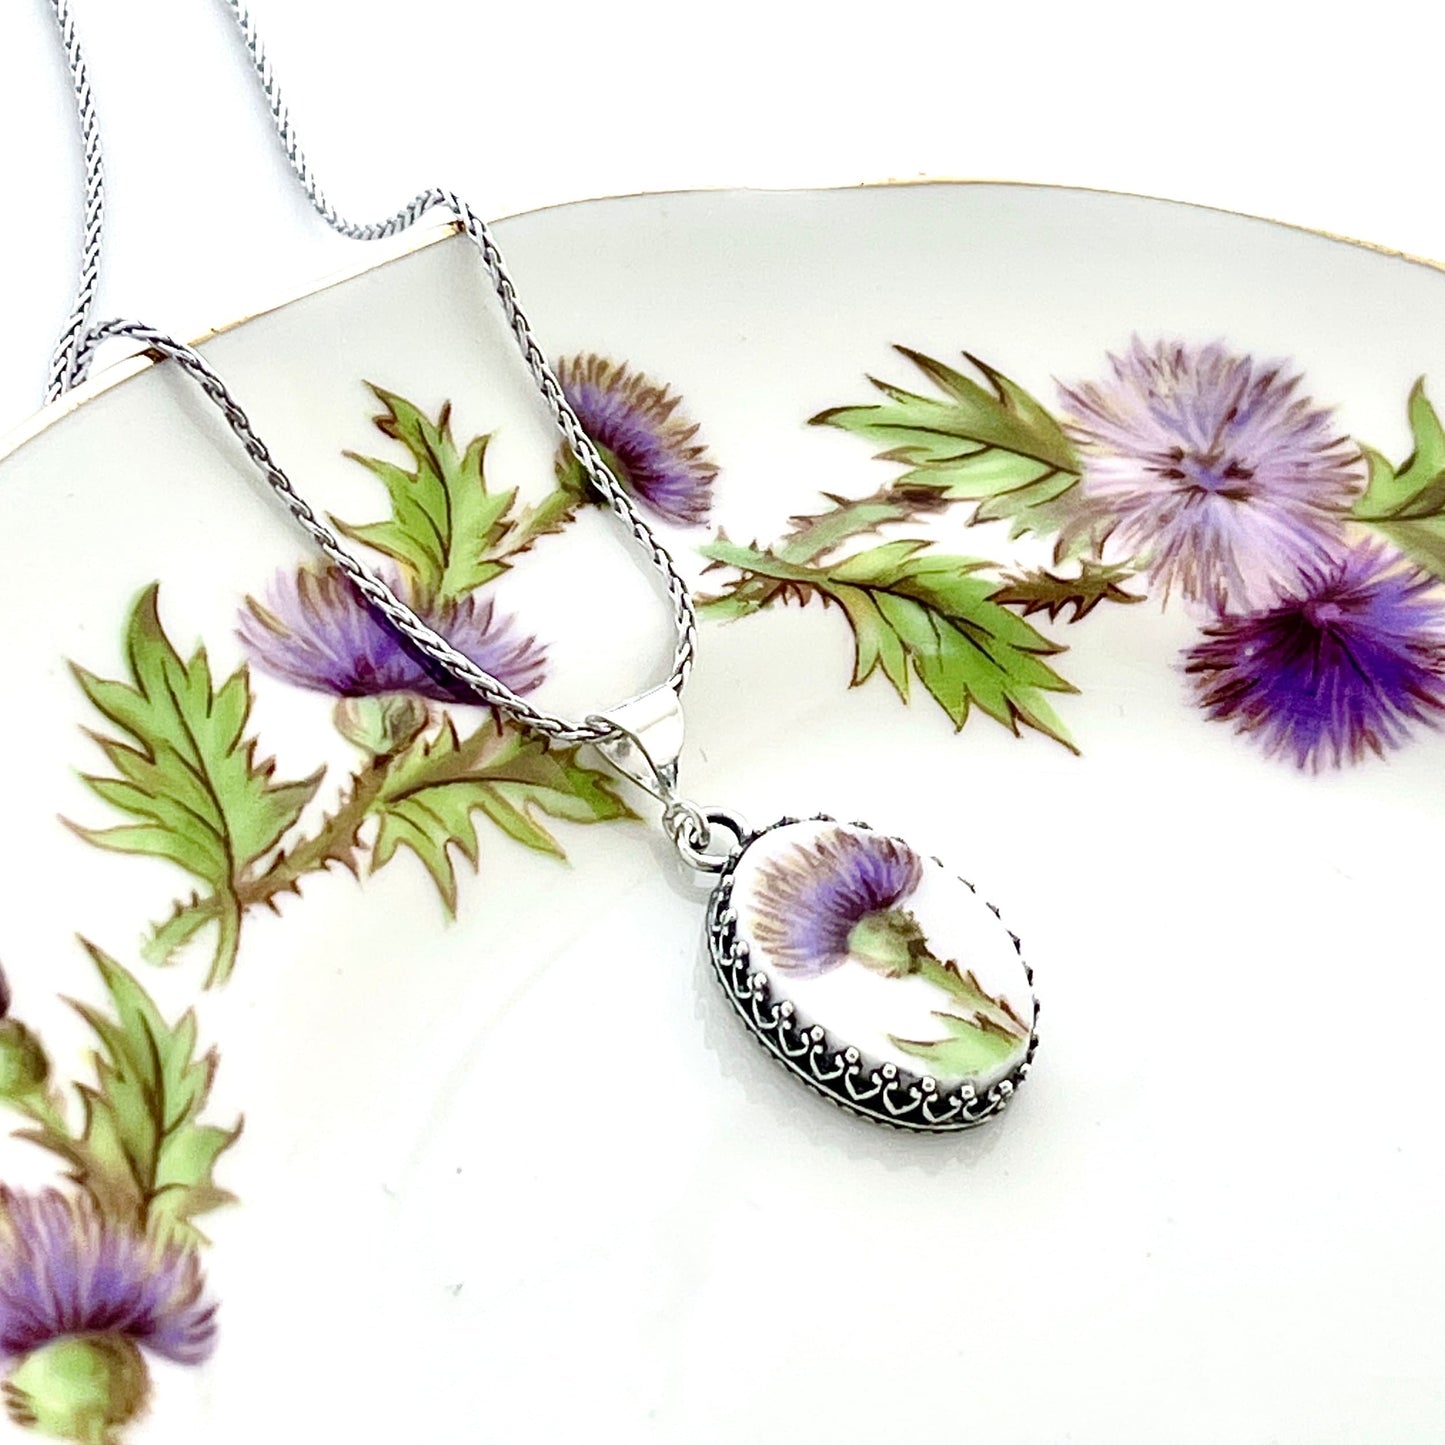 Adjustable Scottish Thistle Necklace, Dainty Sterling Silver Broken China Jewelry, Scottish Gifts for Women, Anniversary Gifts